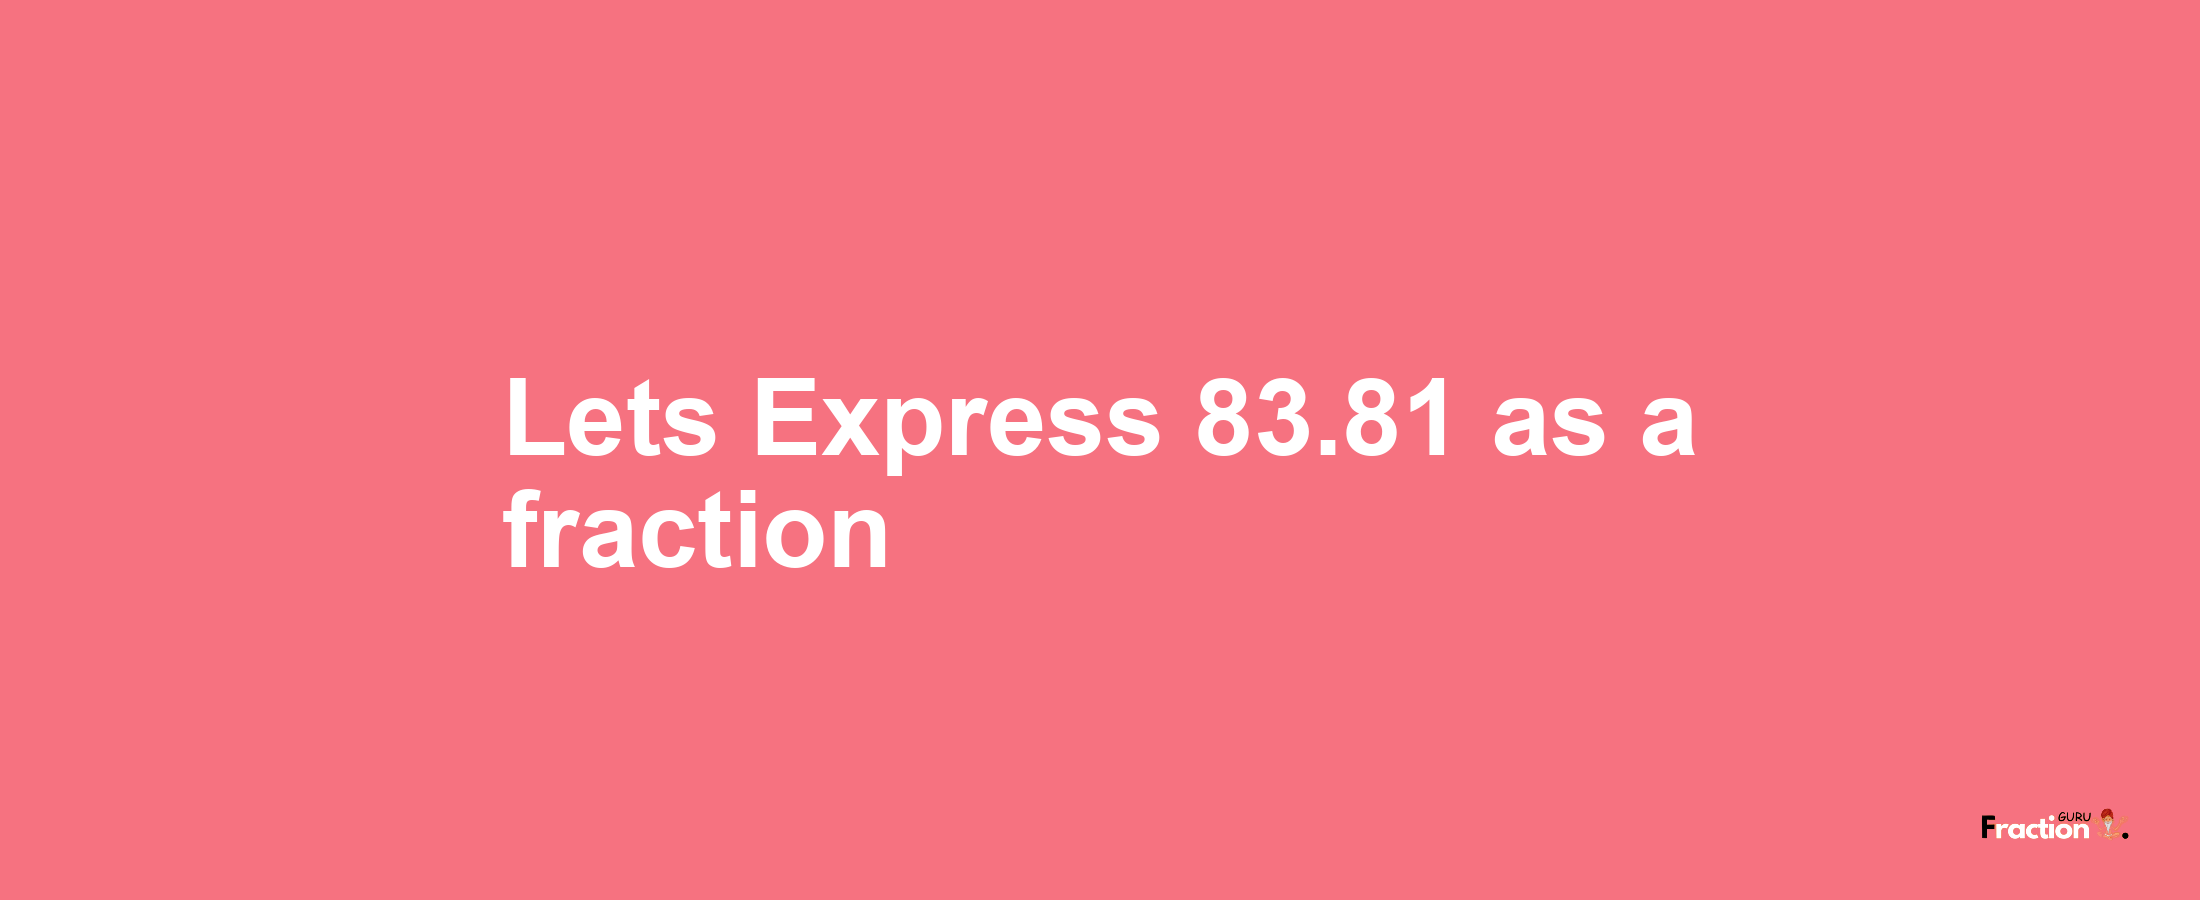 Lets Express 83.81 as afraction